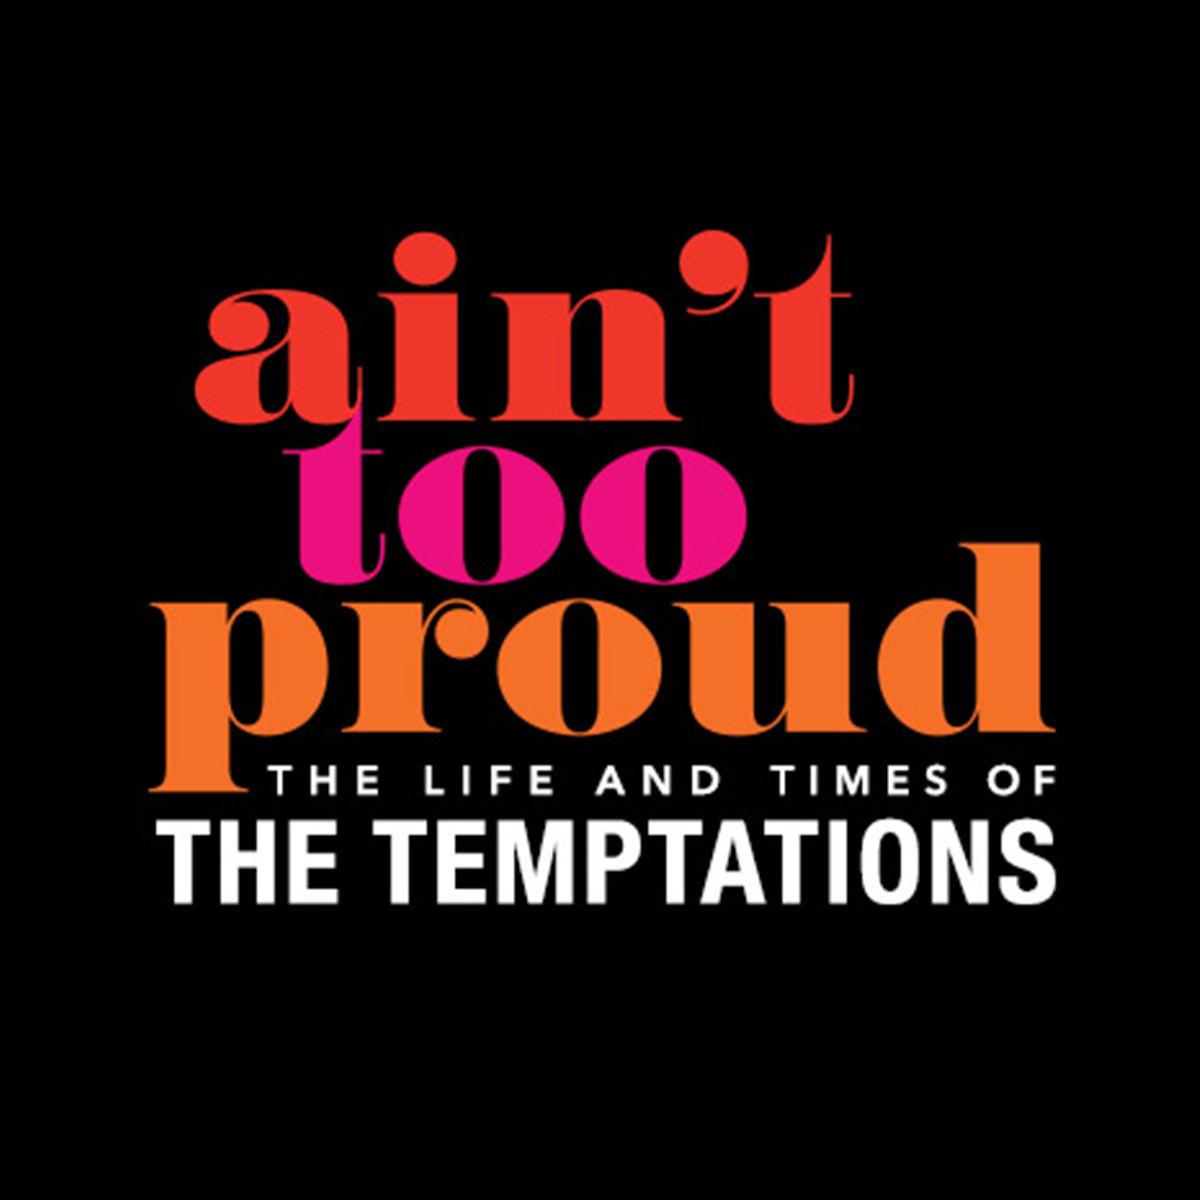 Ain’t Too Proud: The Life and Times of the Temptations on Where Rockies